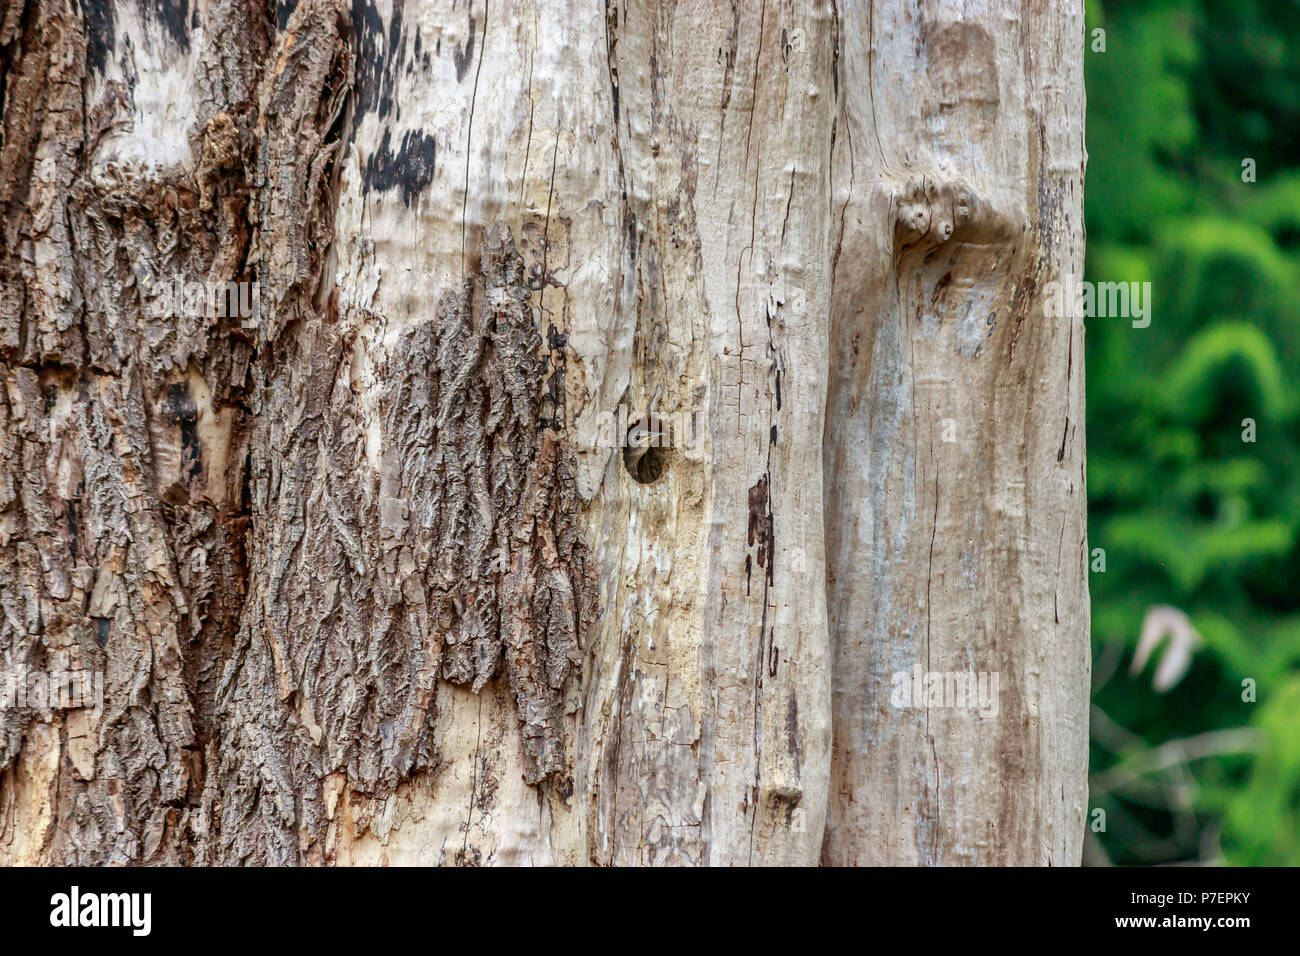 small face of baby woodpecker watching from tree Stock Photo